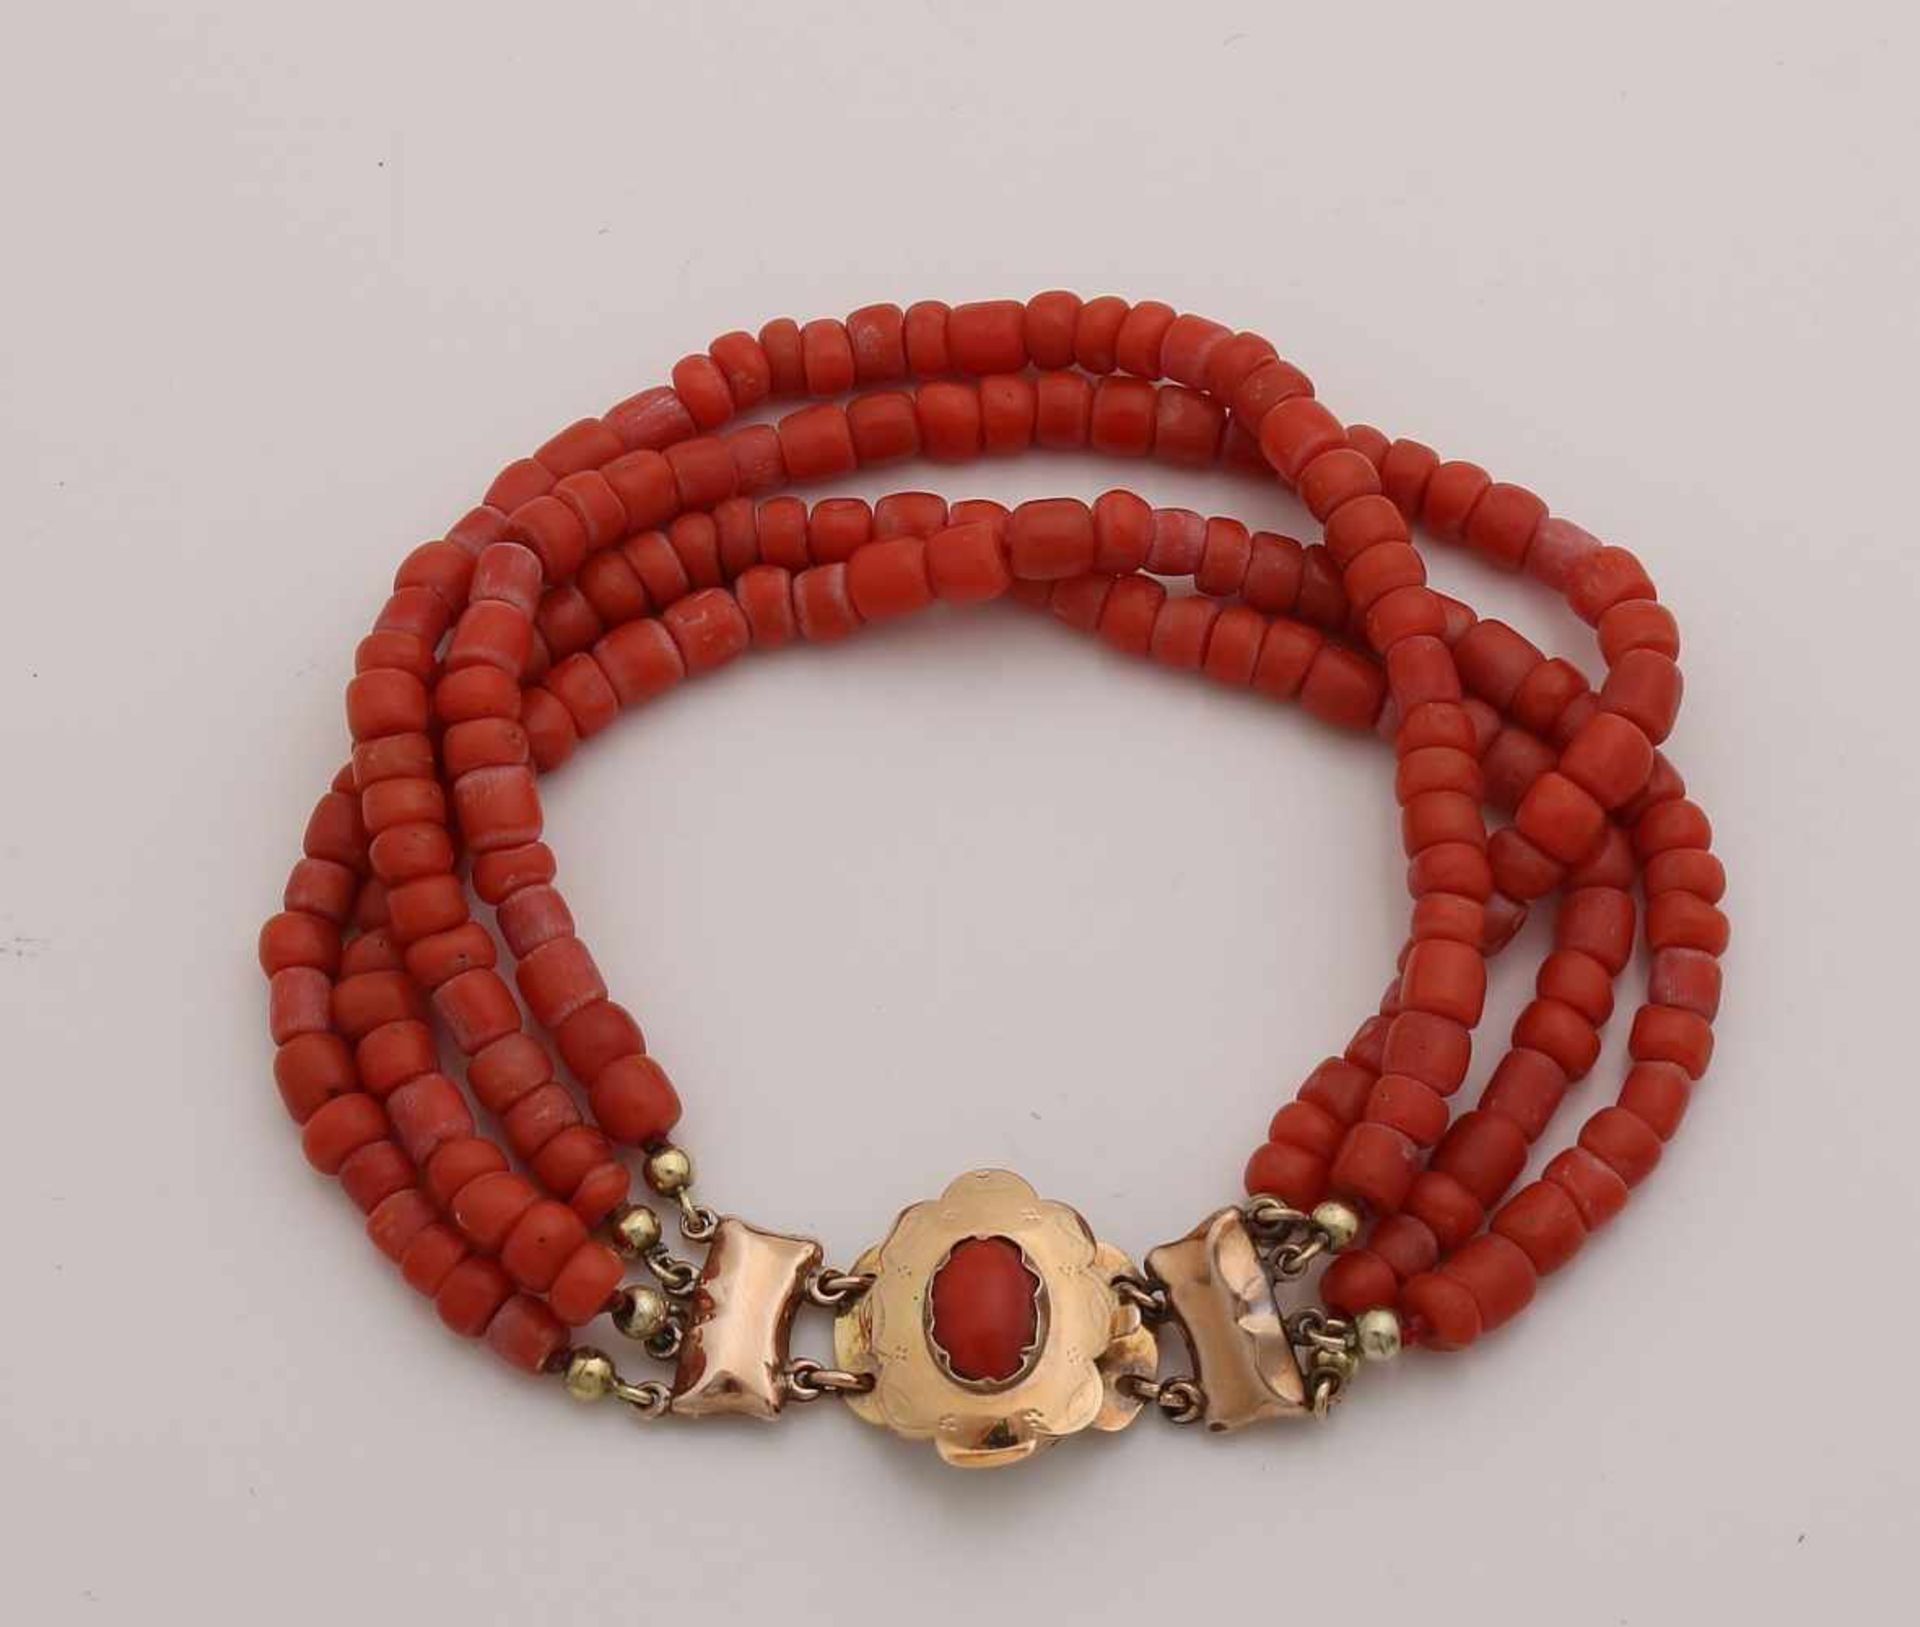 Bracelet of red coral with the yellow gold clasp, 585/000. Bracelet with 4 rows of red coral, some